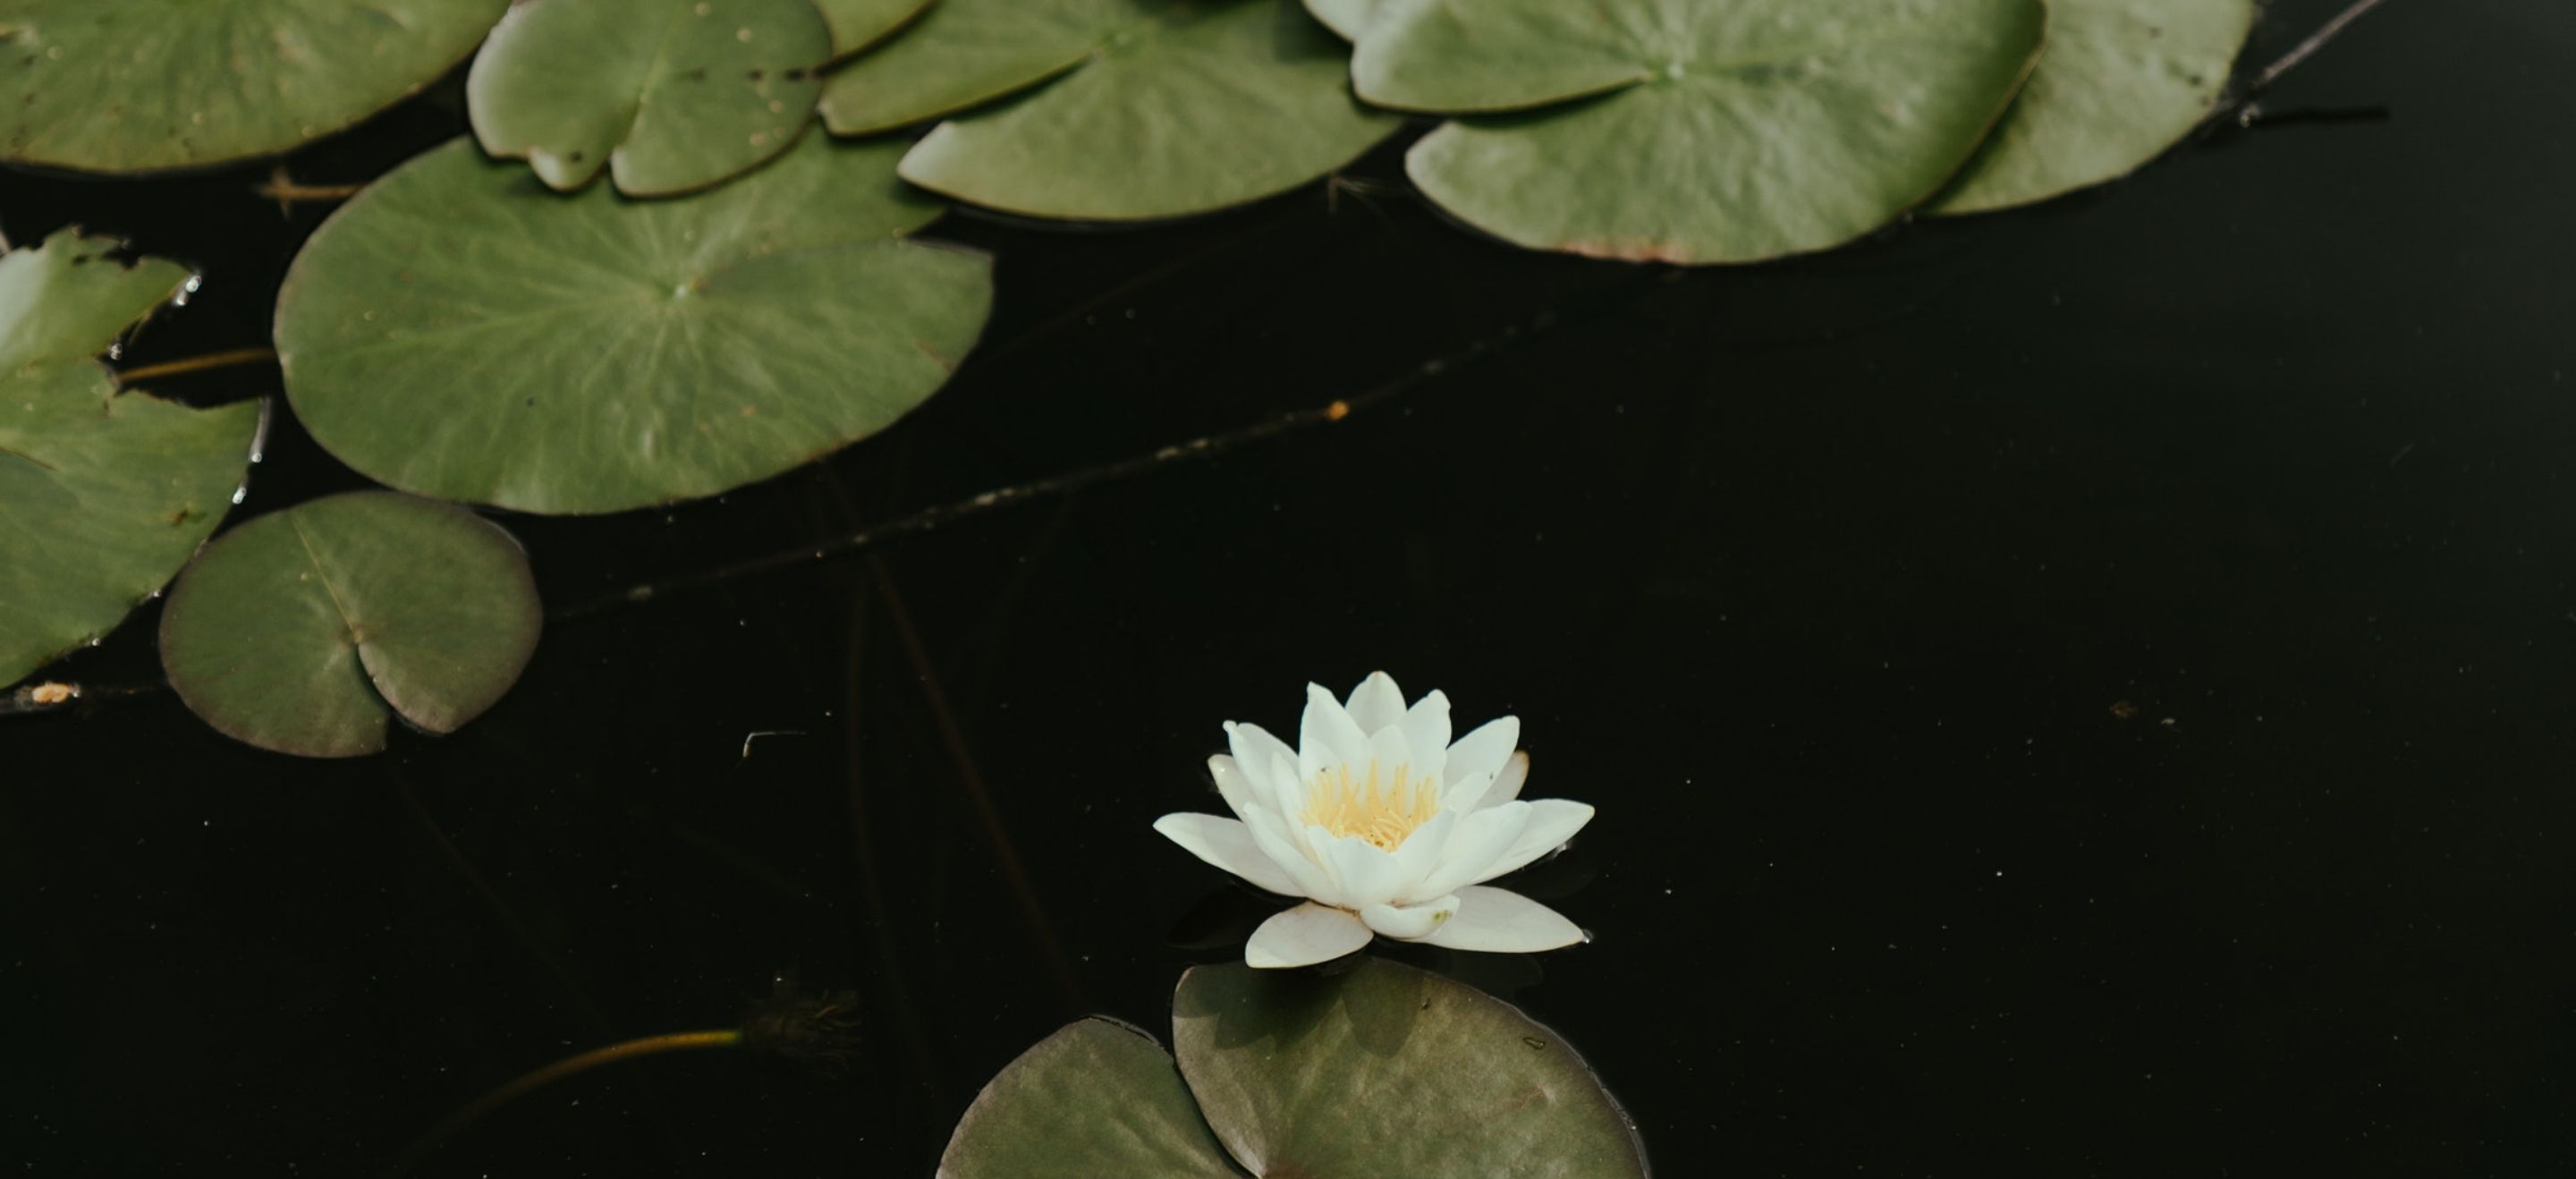 A single white lotus surrounded by lily pads